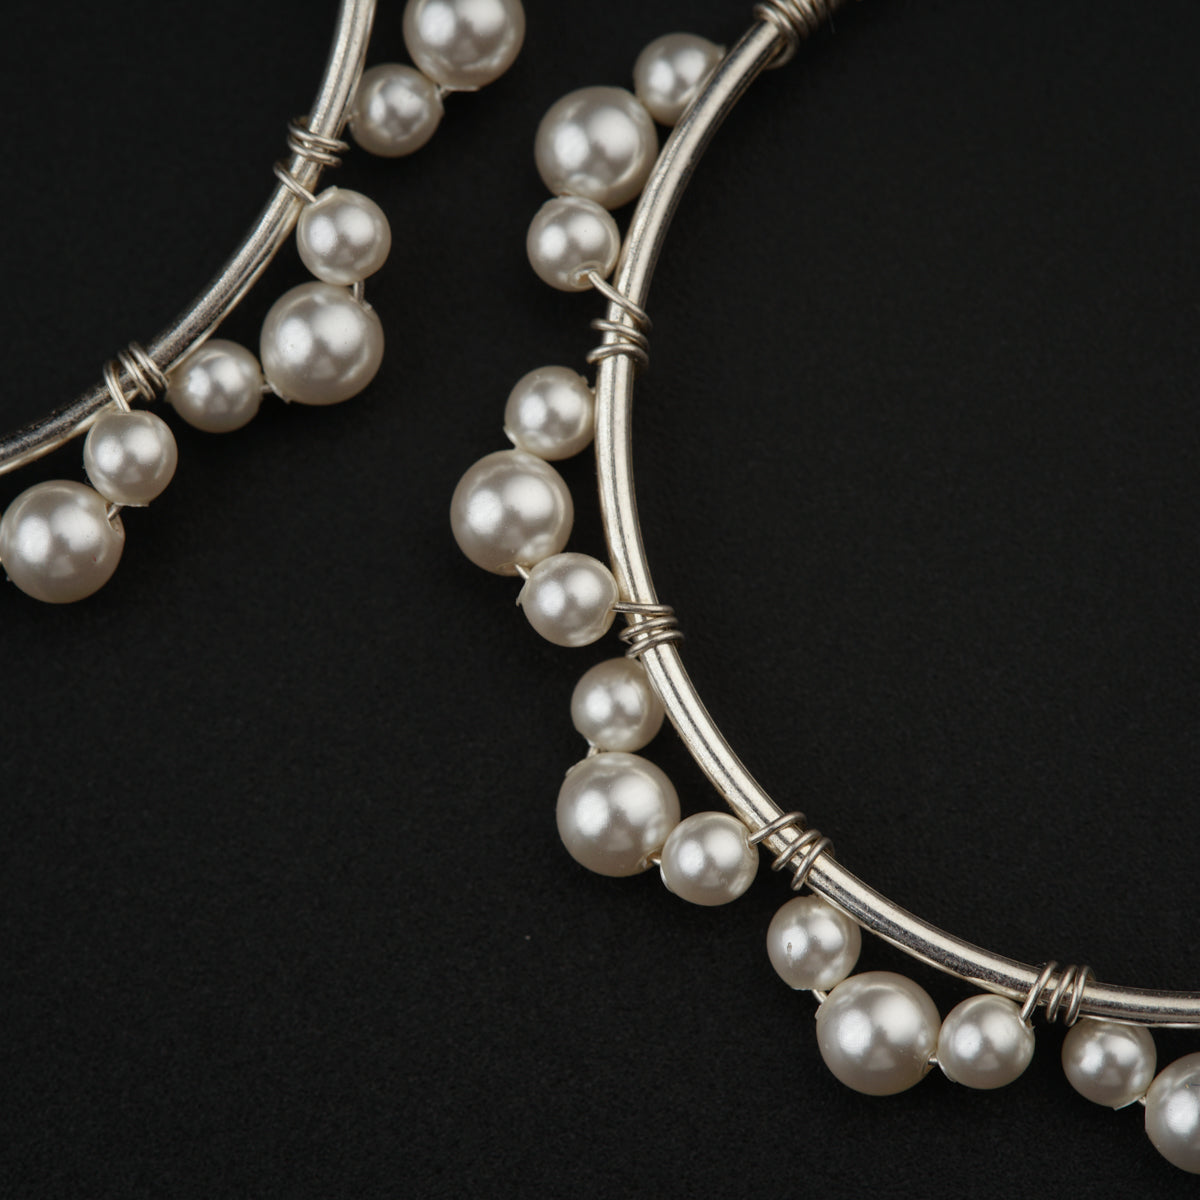 a close up of a pair of earrings with pearls